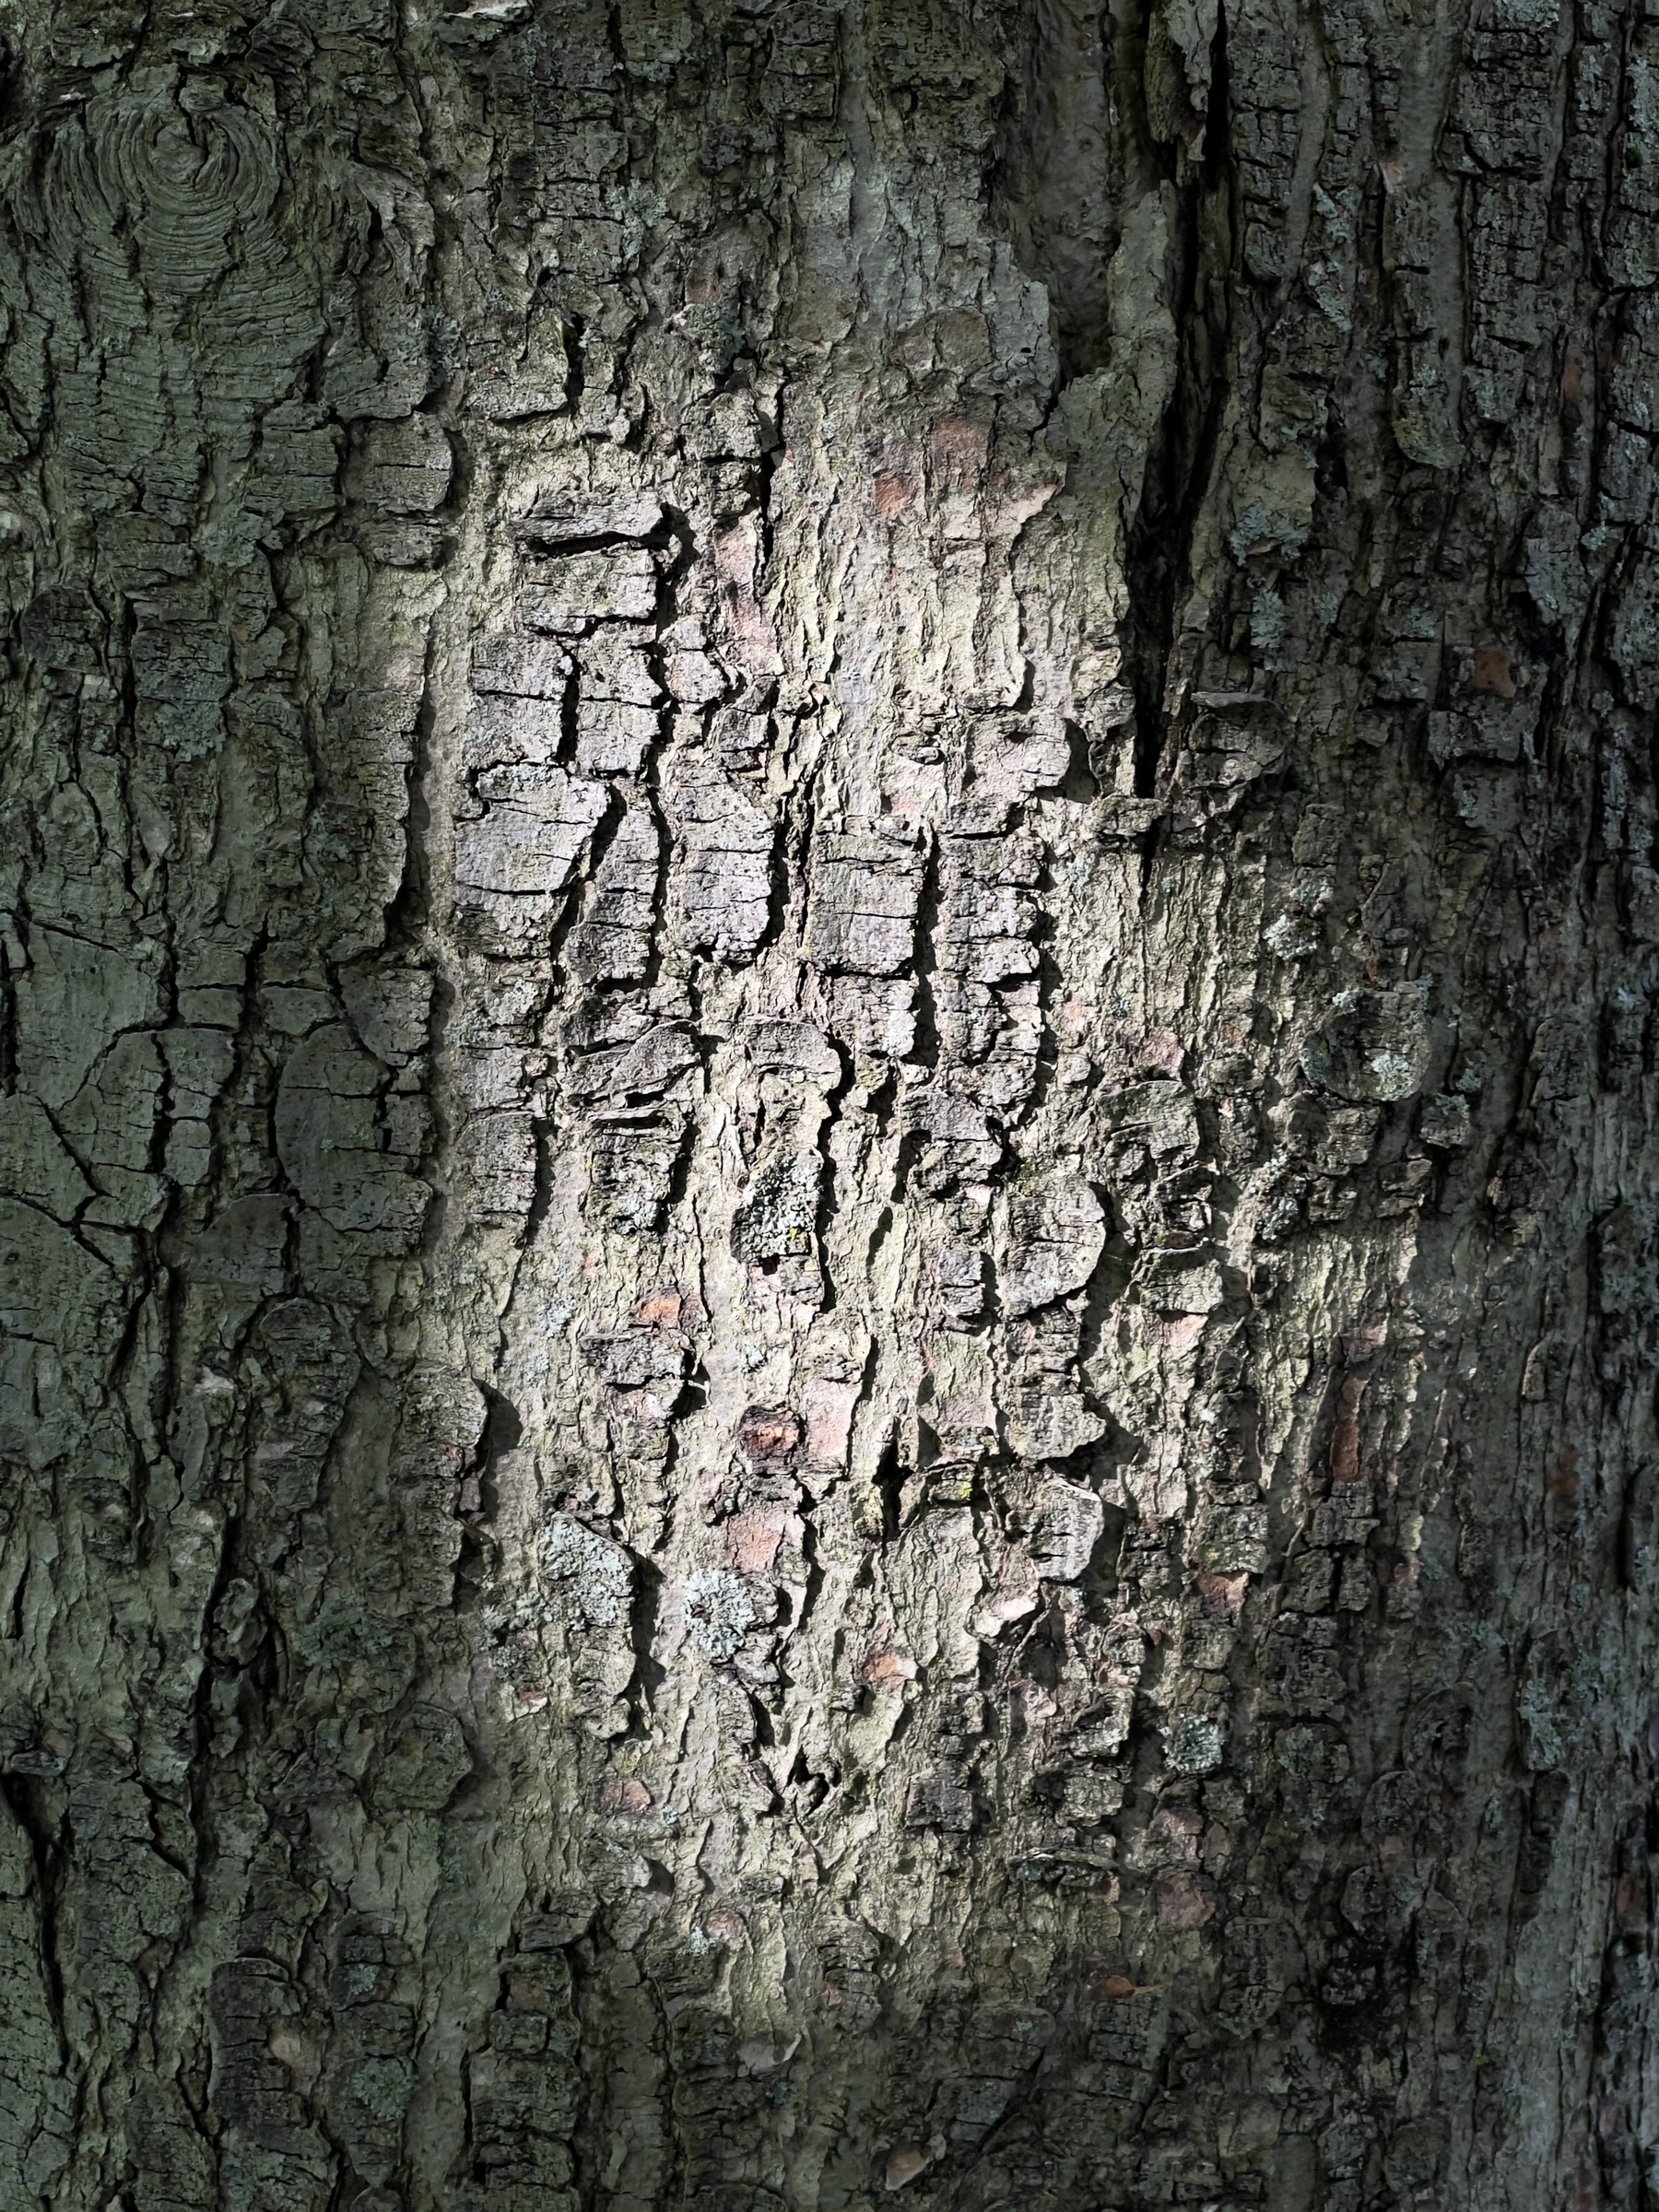 Sun patch on trunk of tree.